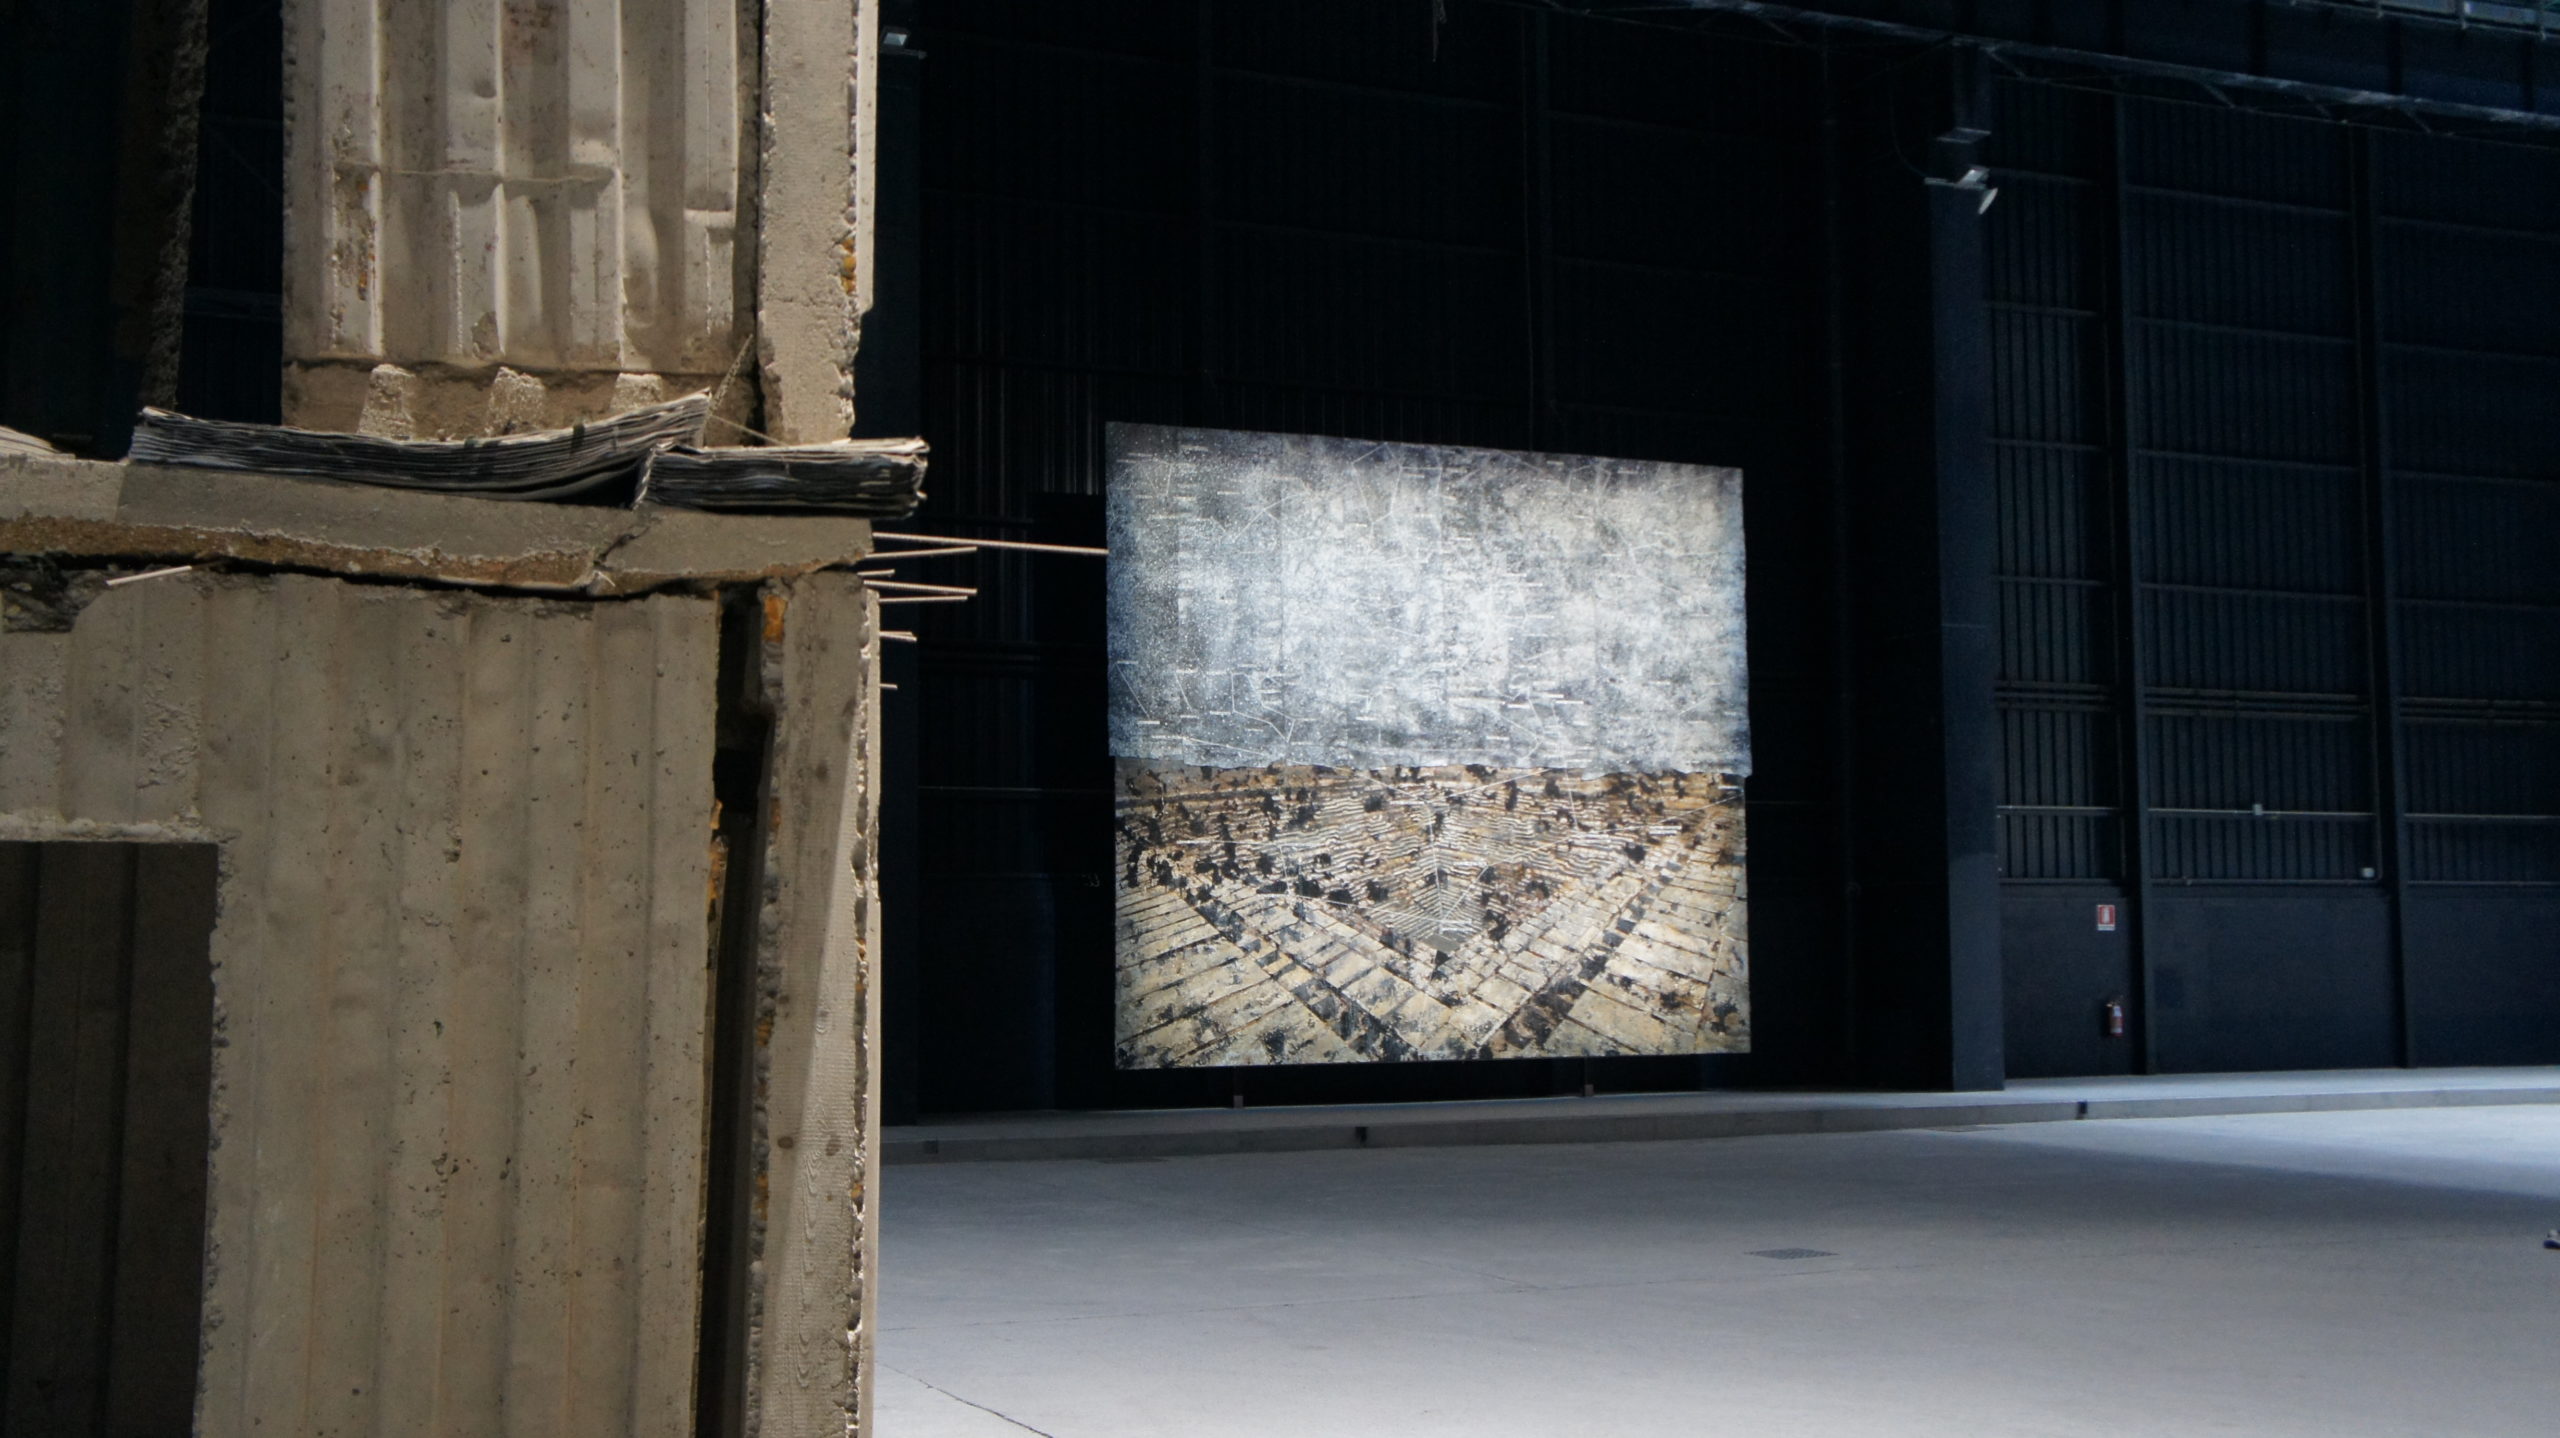 These are Anselm Kiefer’s teetering towers